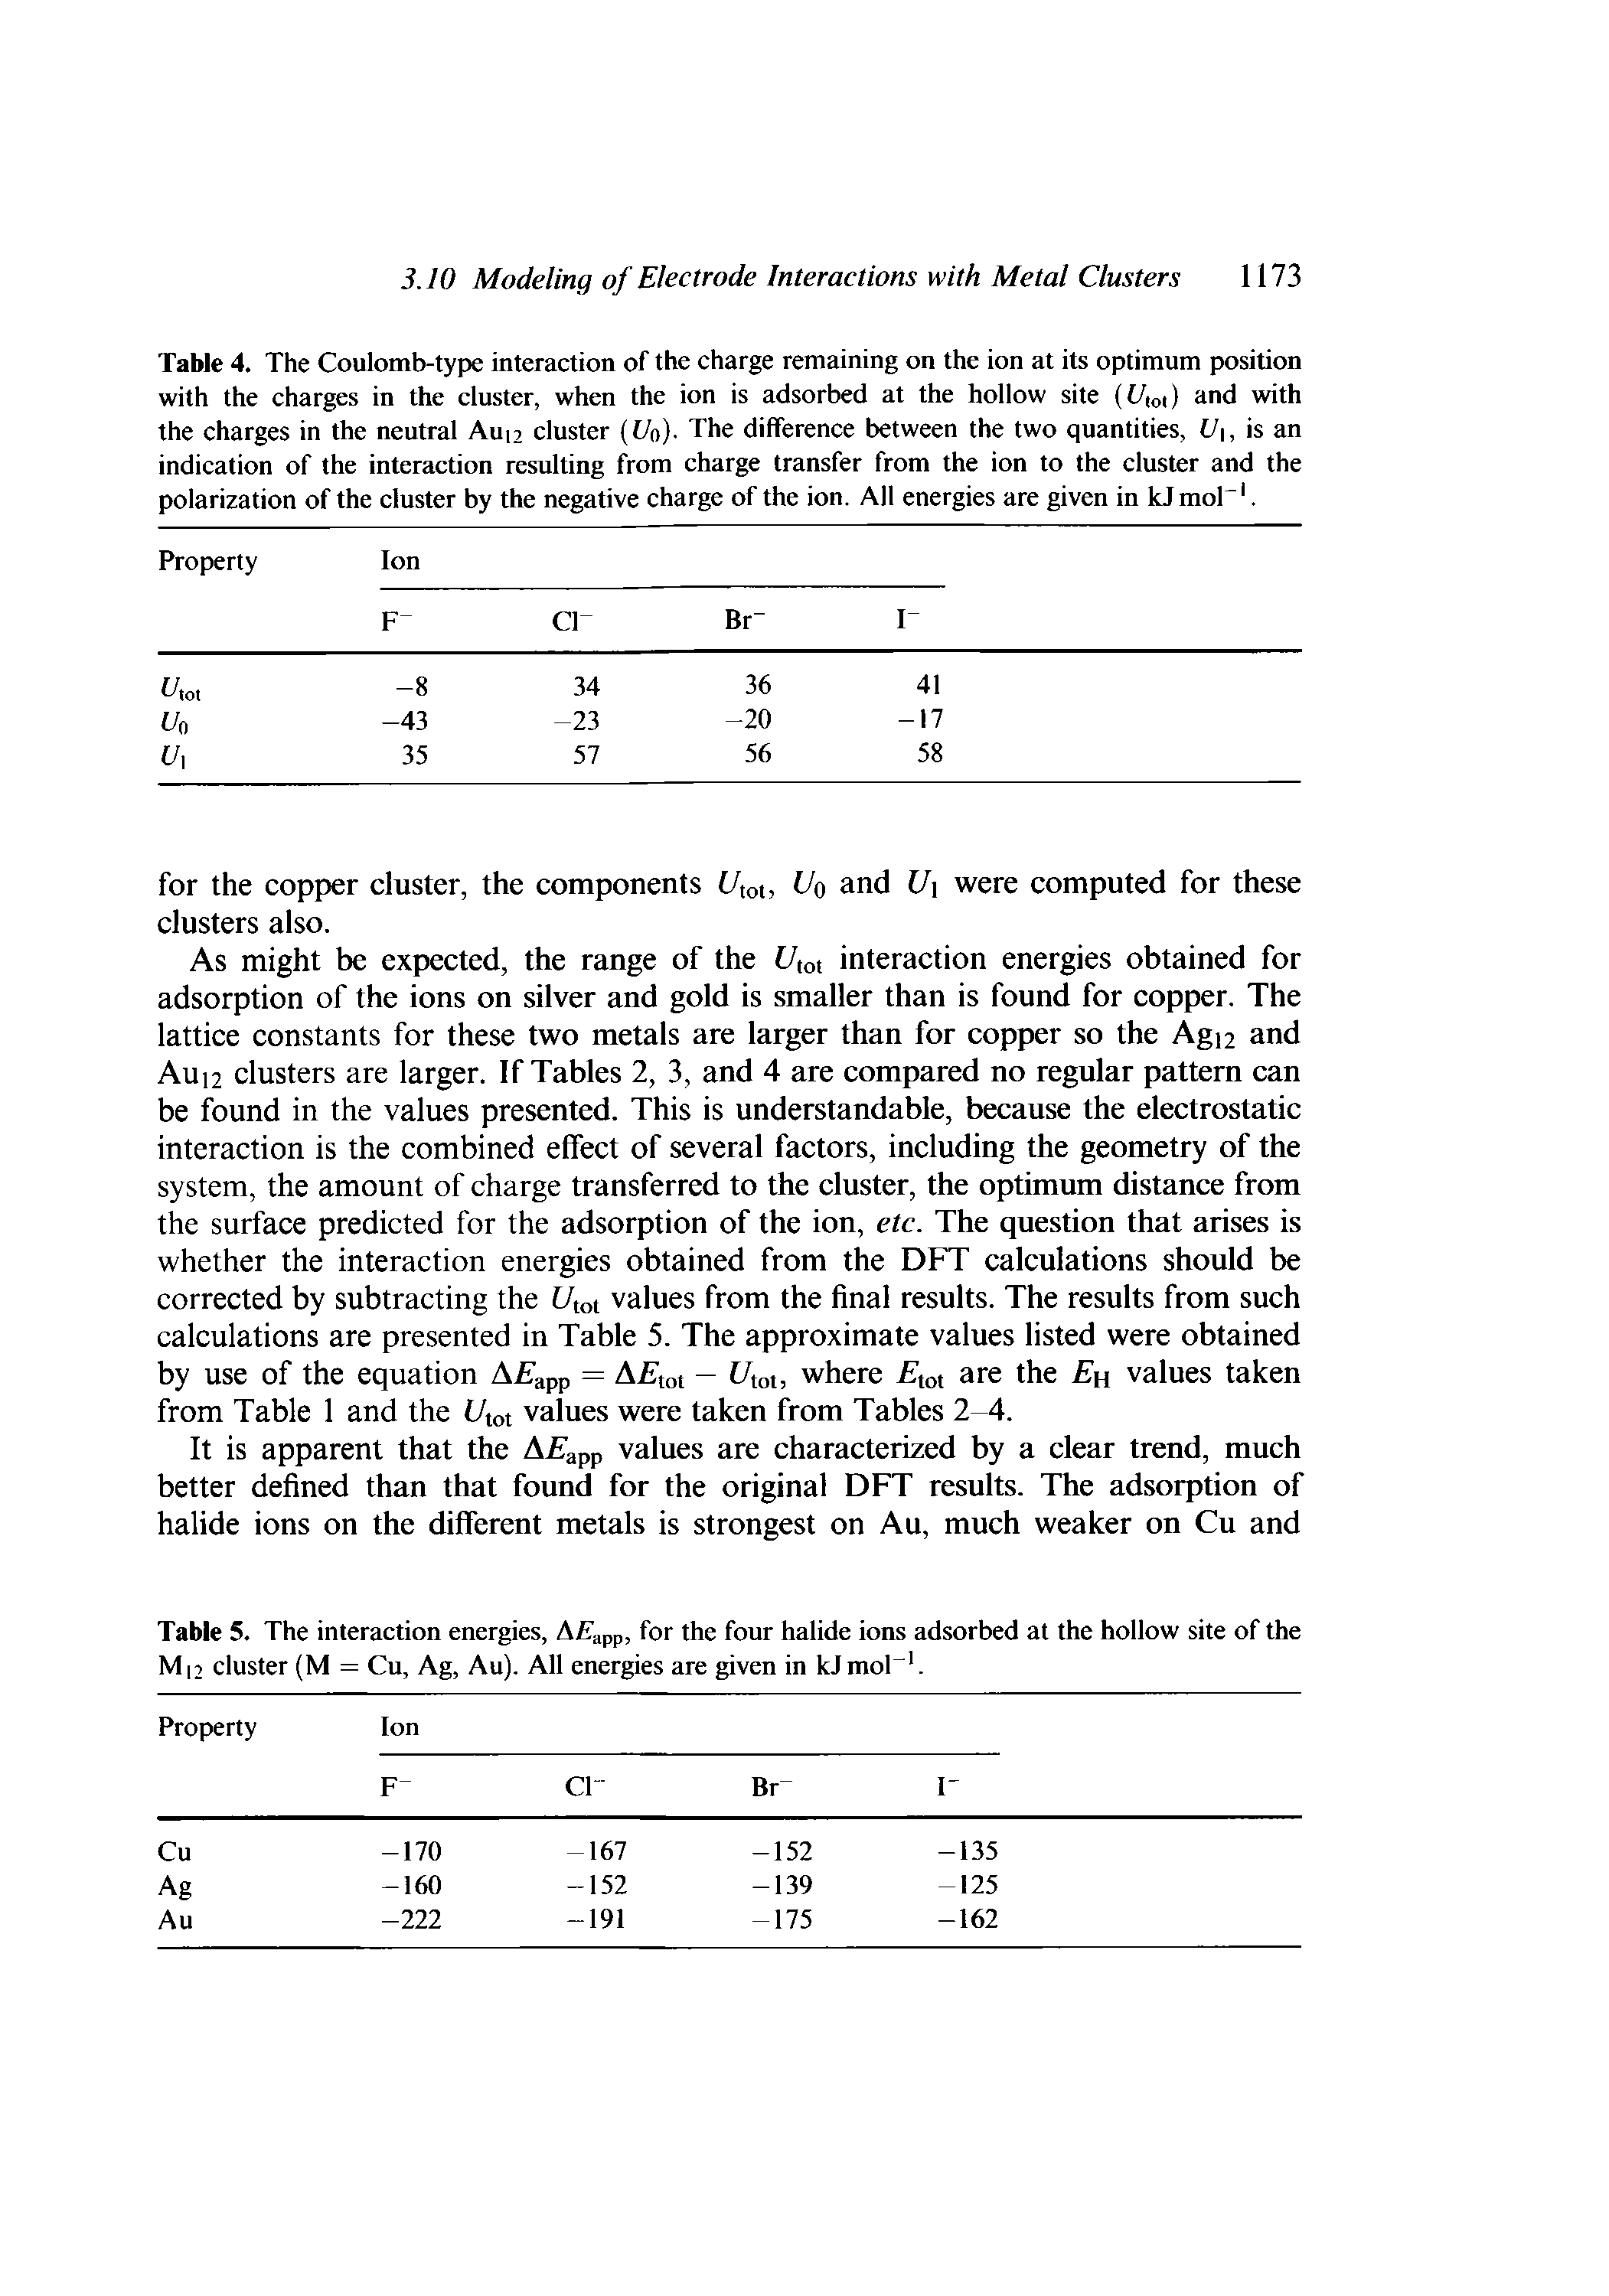 Table 4. The Coulomb-type interaction of the charge remaining on the ion at its optimum position with the charges in the cluster, when the ion is adsorbed at the hollow site (t/,oi) and with the charges in the neutral Aun cluster (f/o). The dilference between the two quantities, U, is an indication of the interaction resulting from charge transfer from the ion to the cluster and the polarization of the eluster by the negative charge of the ion. All energies are given in kJ moC. ...